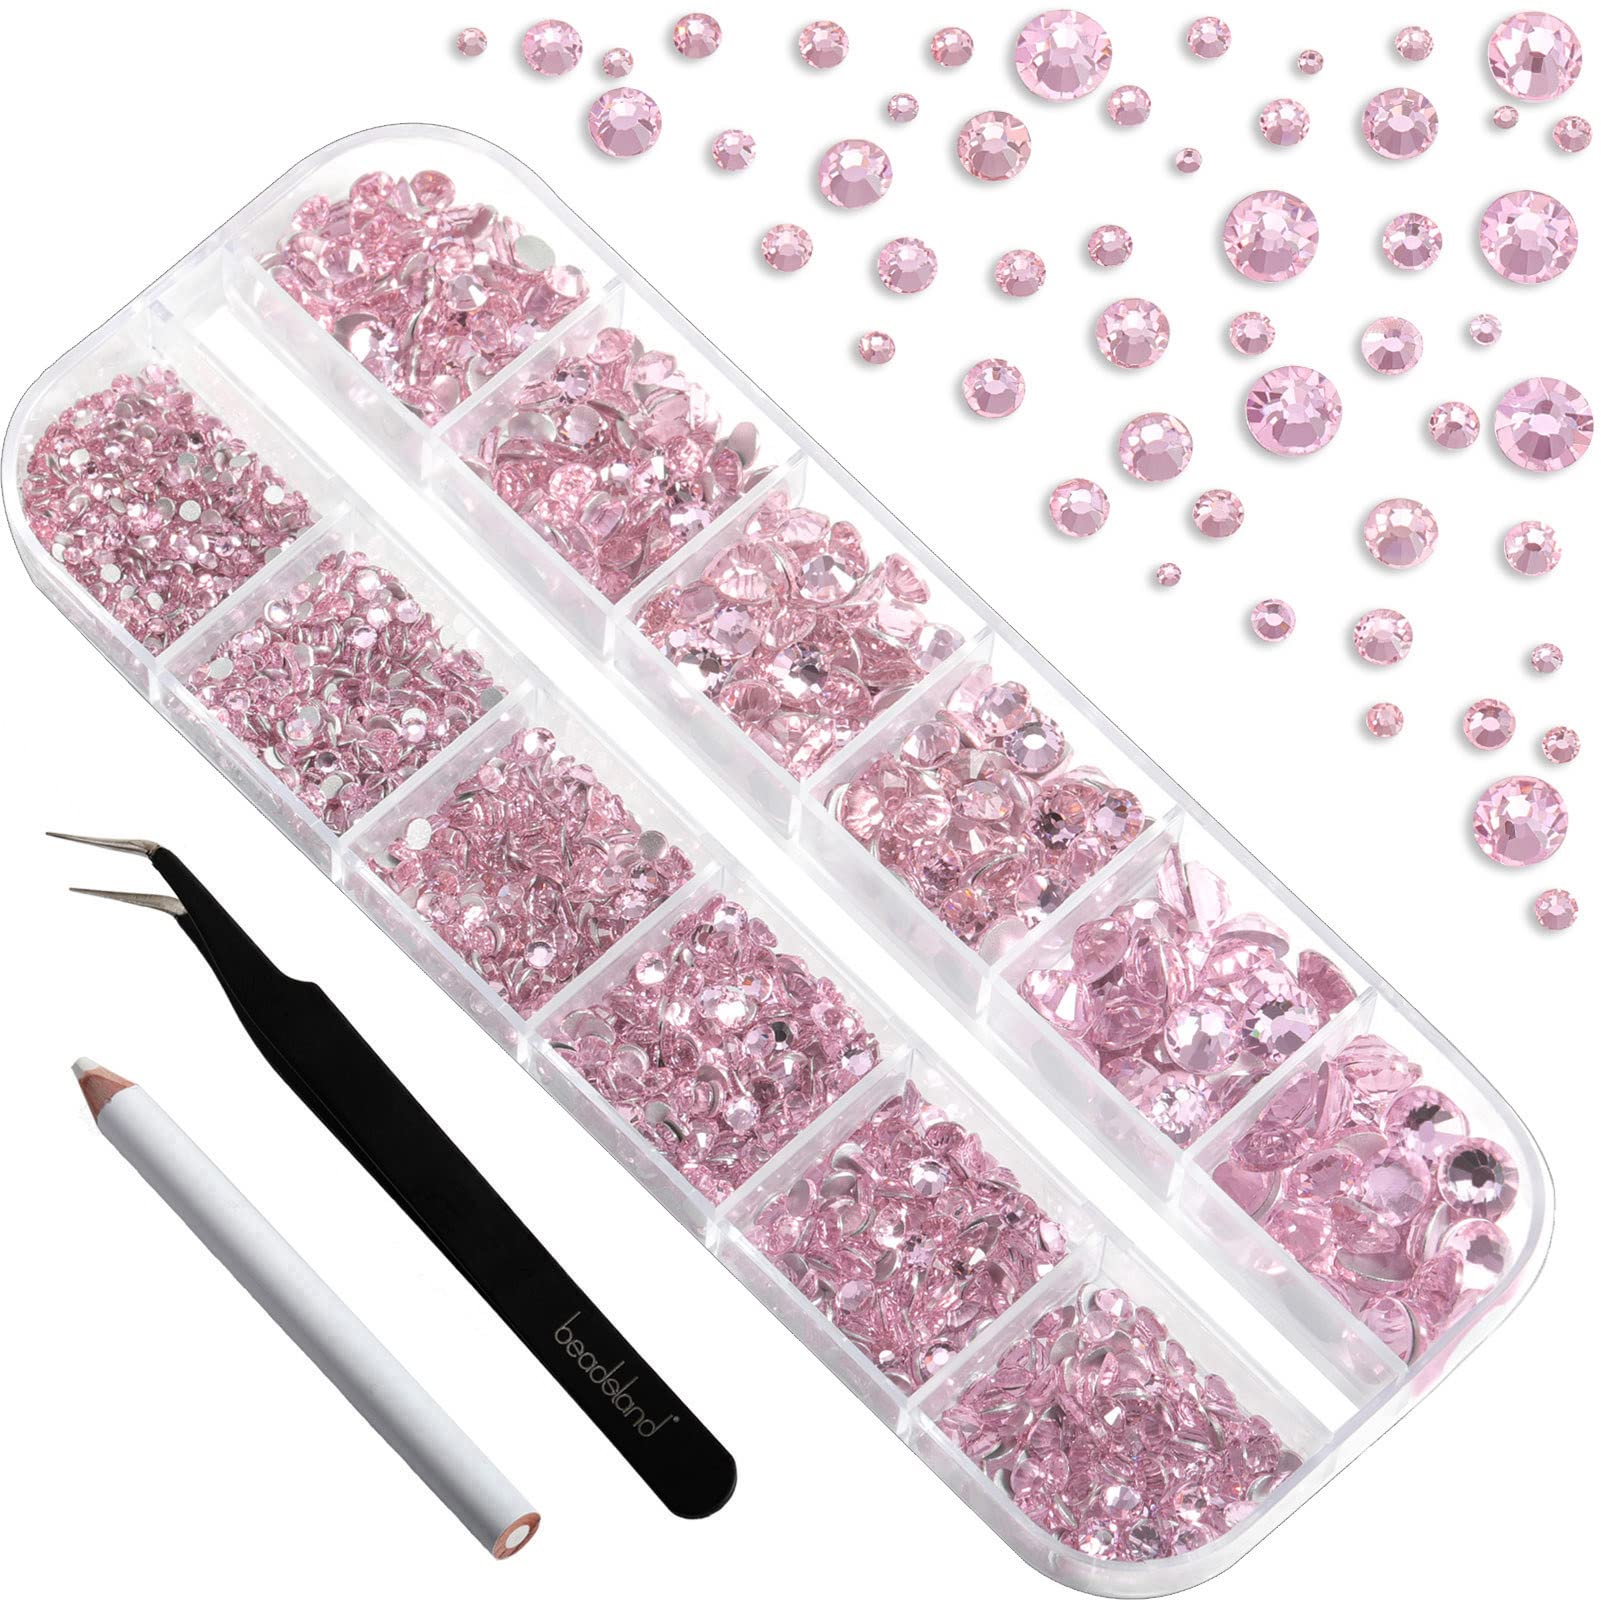 The Crafts Outlet Flatback Rhinestones, Faceted Round, 16mm, 144-pc, Light Pink